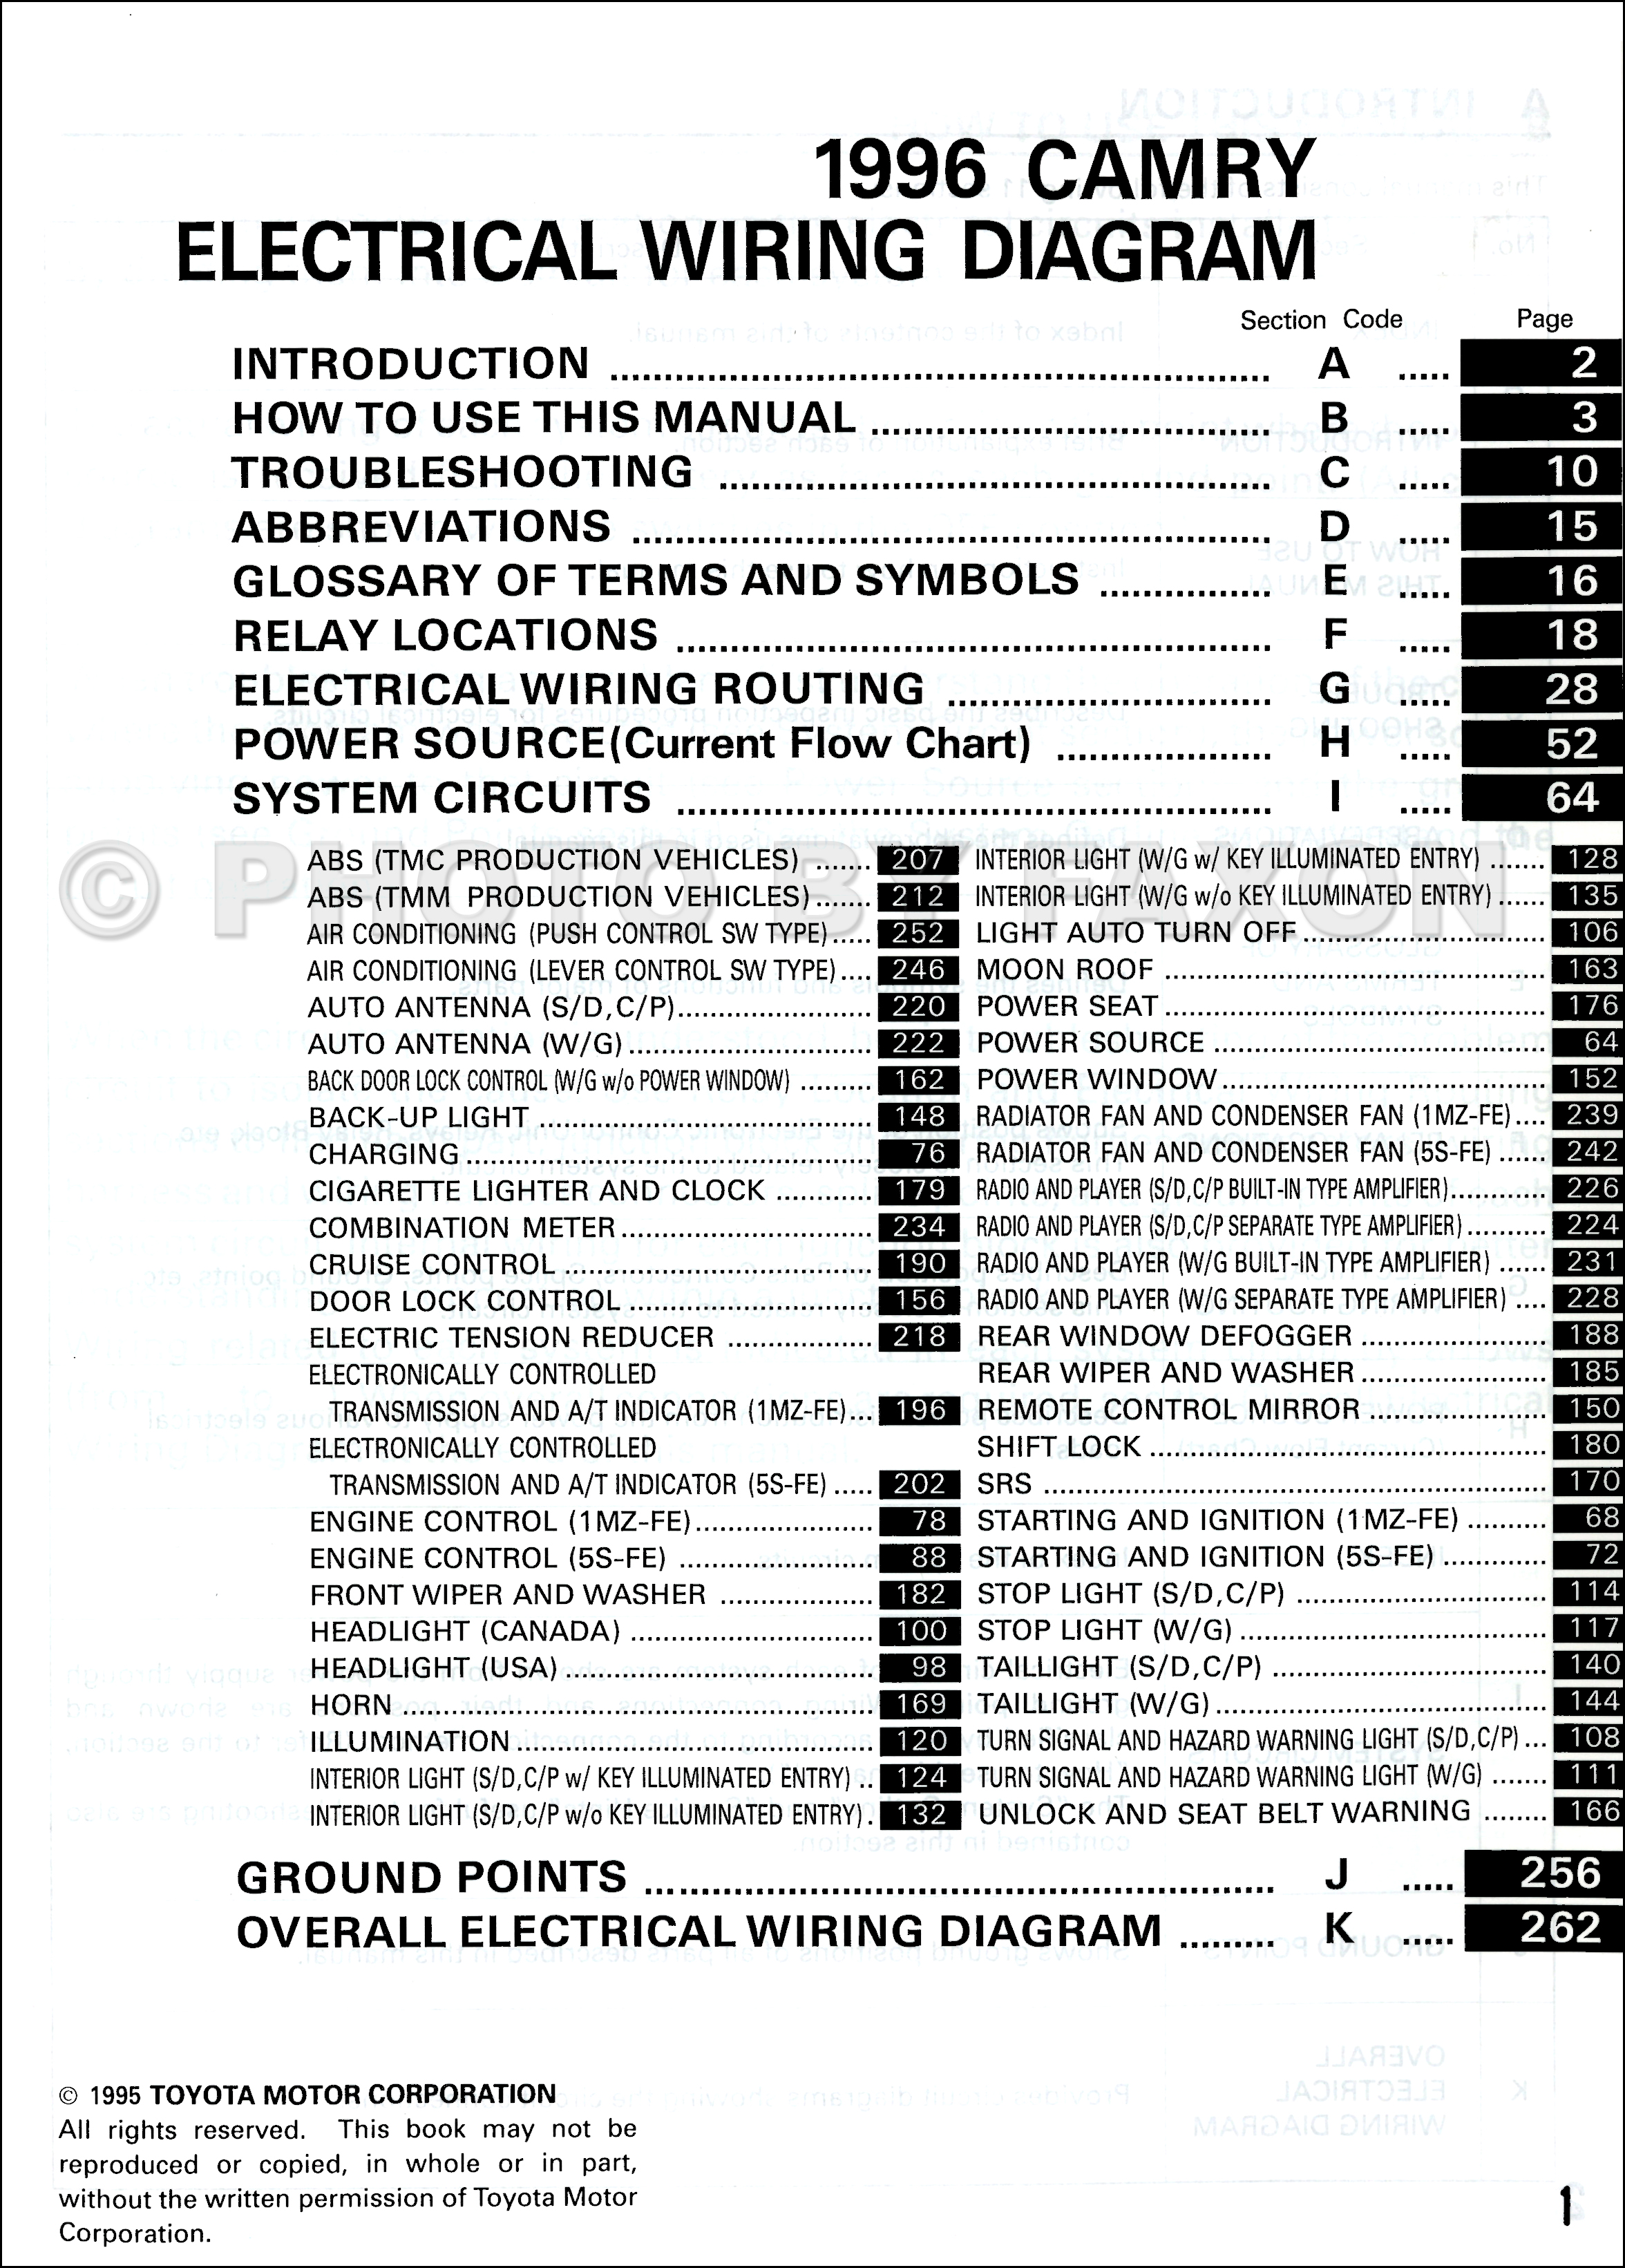 Wiring diagram for 1996 toyota camry